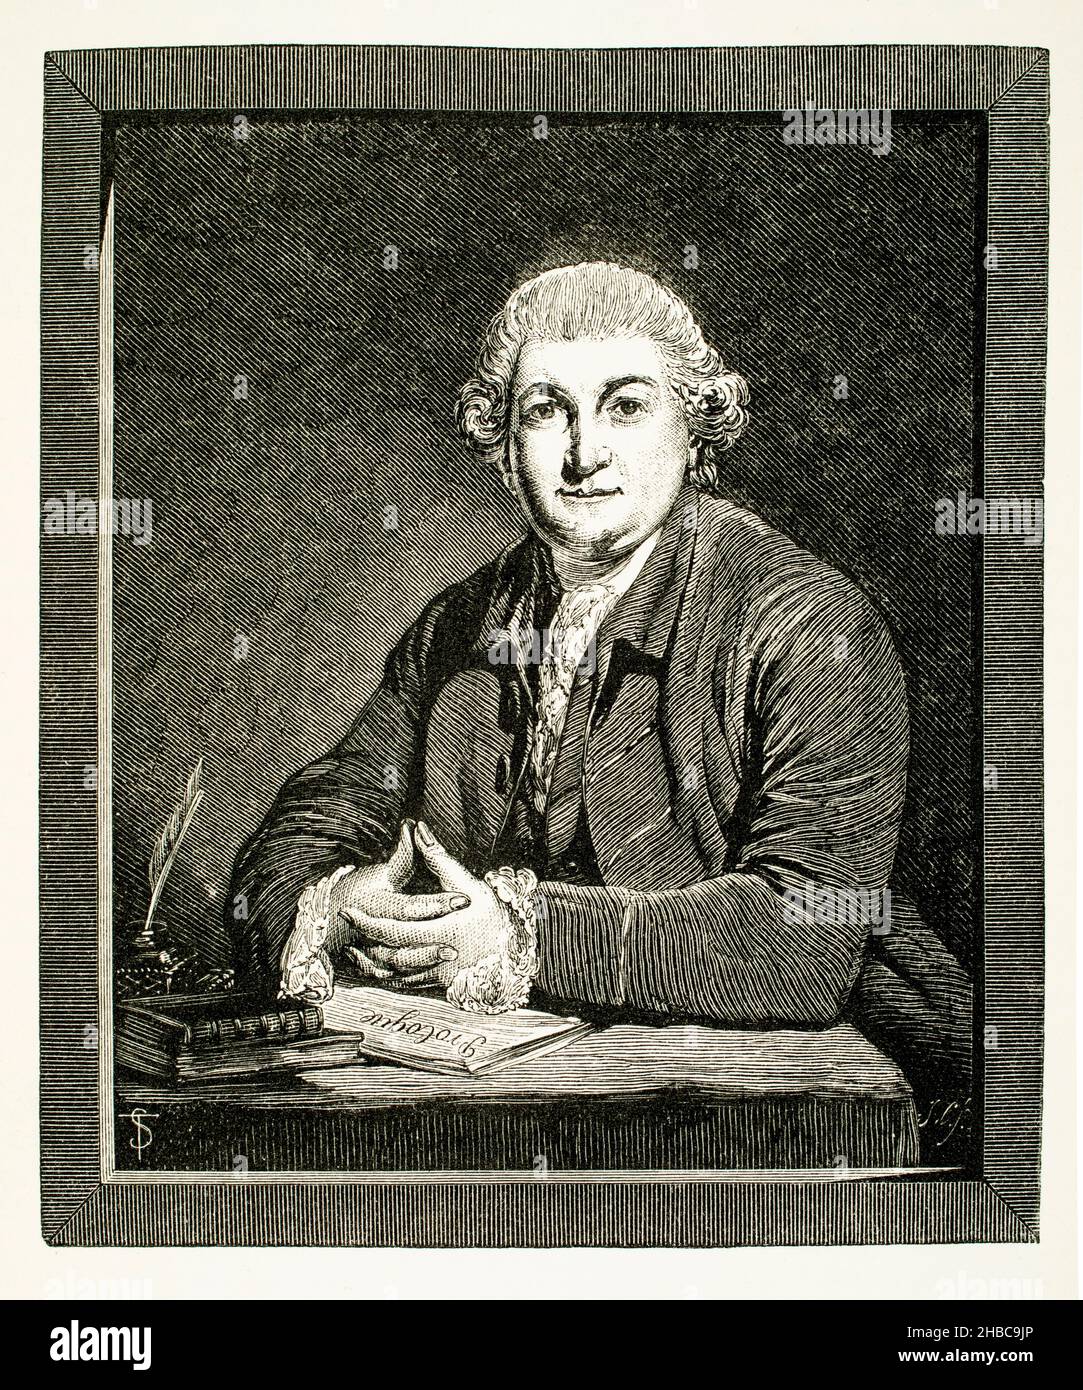 engraved illustration of famous actor David Garrick, from a portrait by Sir Joshua Reynolds, for Boswell’s Life of Johnson, published in 1866 Stock Photo